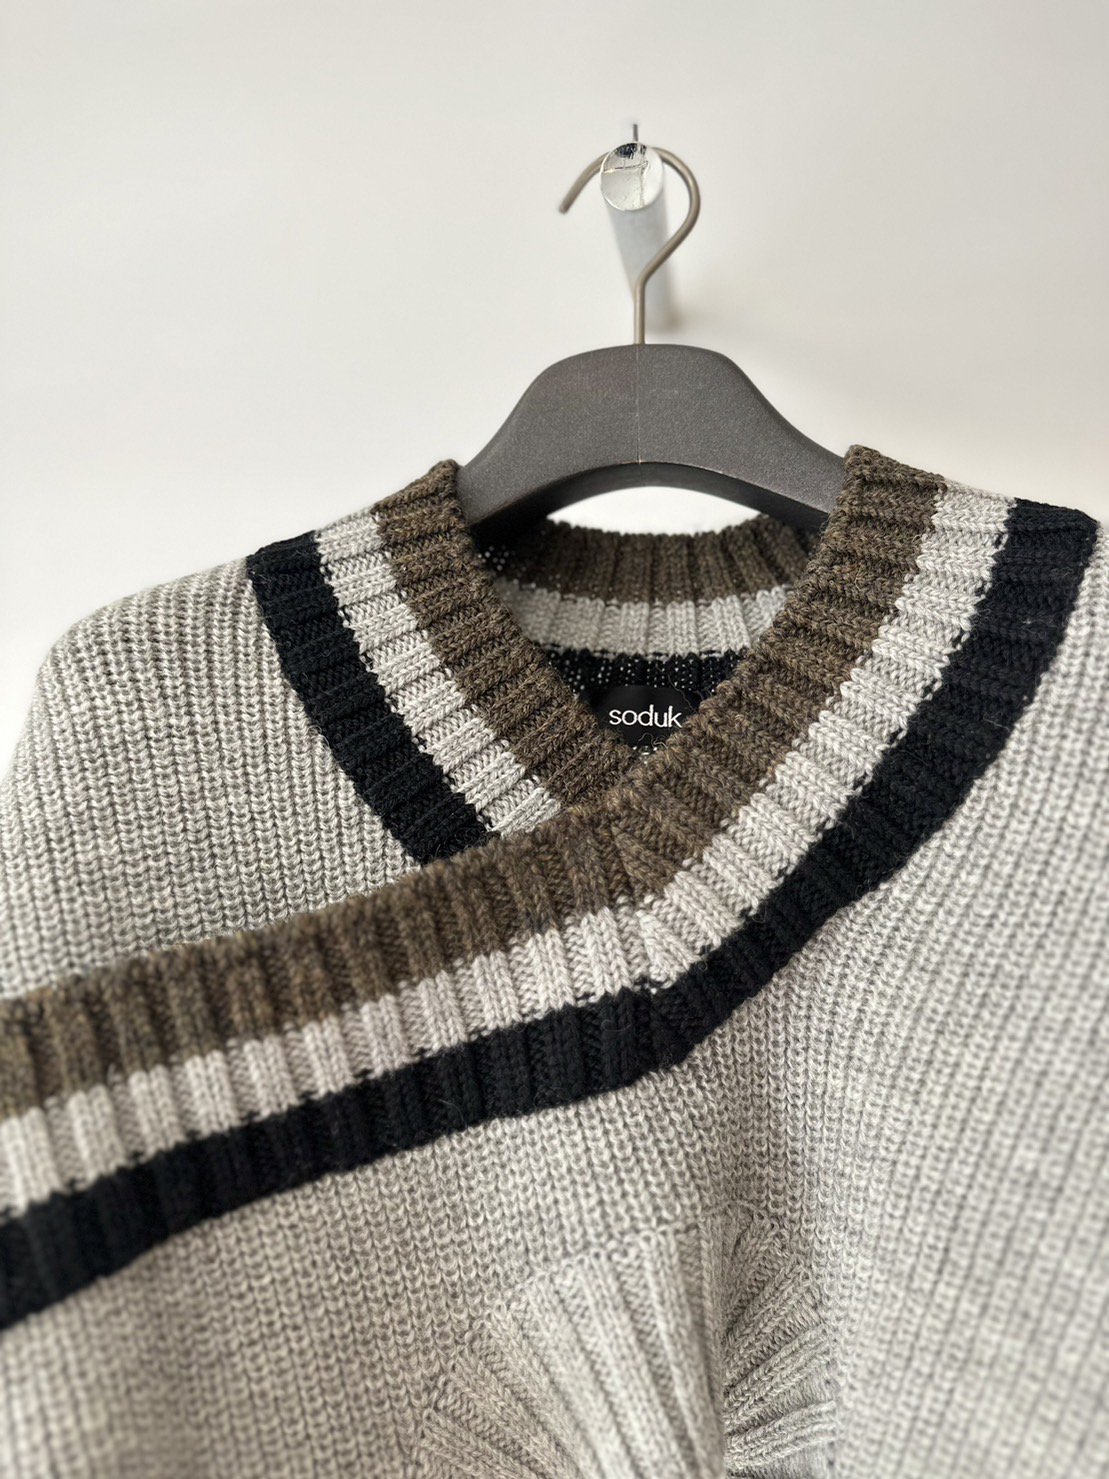 soduk<br />up side down knit top / gray<img class='new_mark_img2' src='https://img.shop-pro.jp/img/new/icons14.gif' style='border:none;display:inline;margin:0px;padding:0px;width:auto;' />